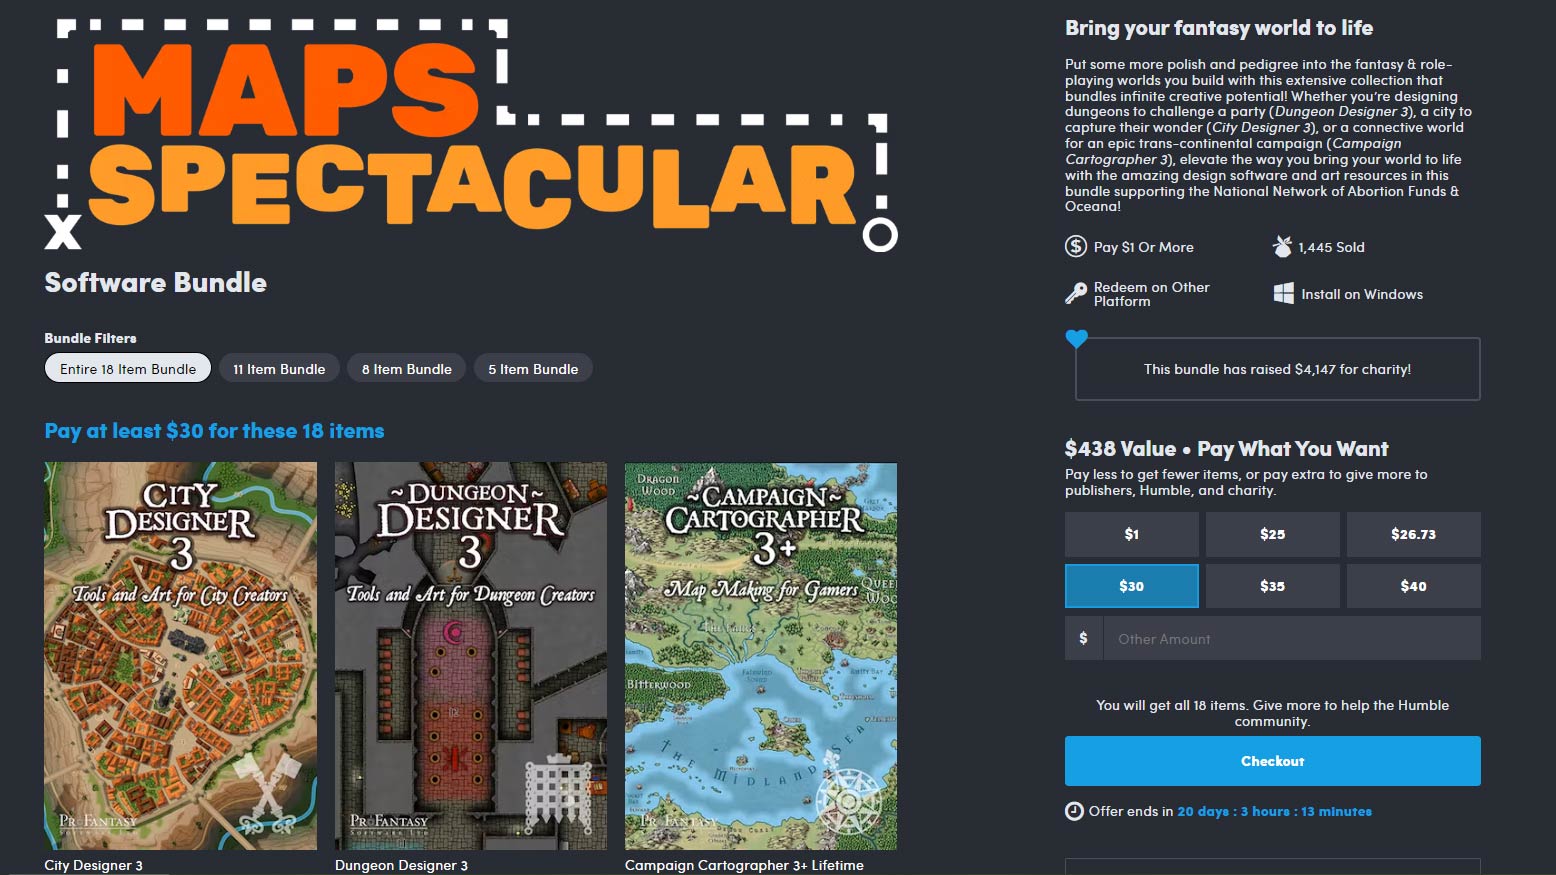 Humble Maps Spectacular Software Bundle helps indie devs build their game worlds